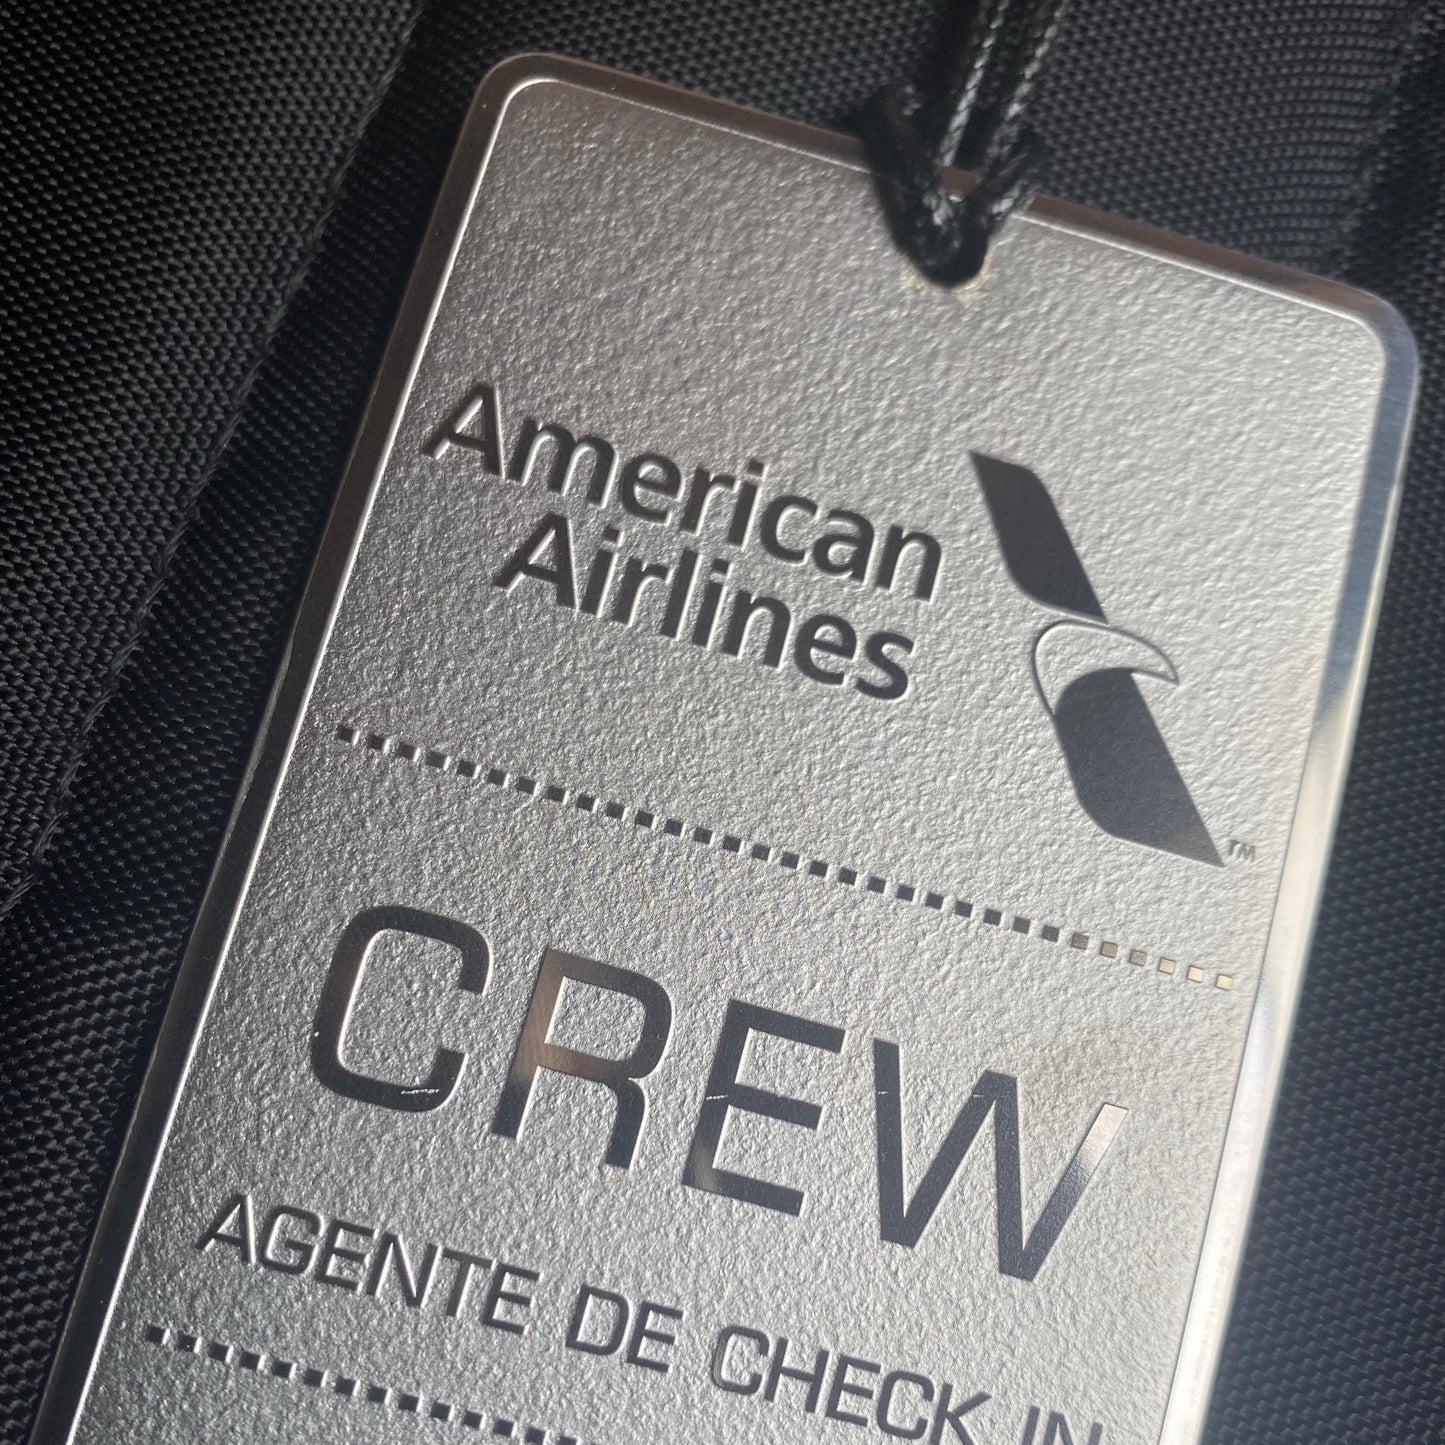 Crew tag American Airlines A320